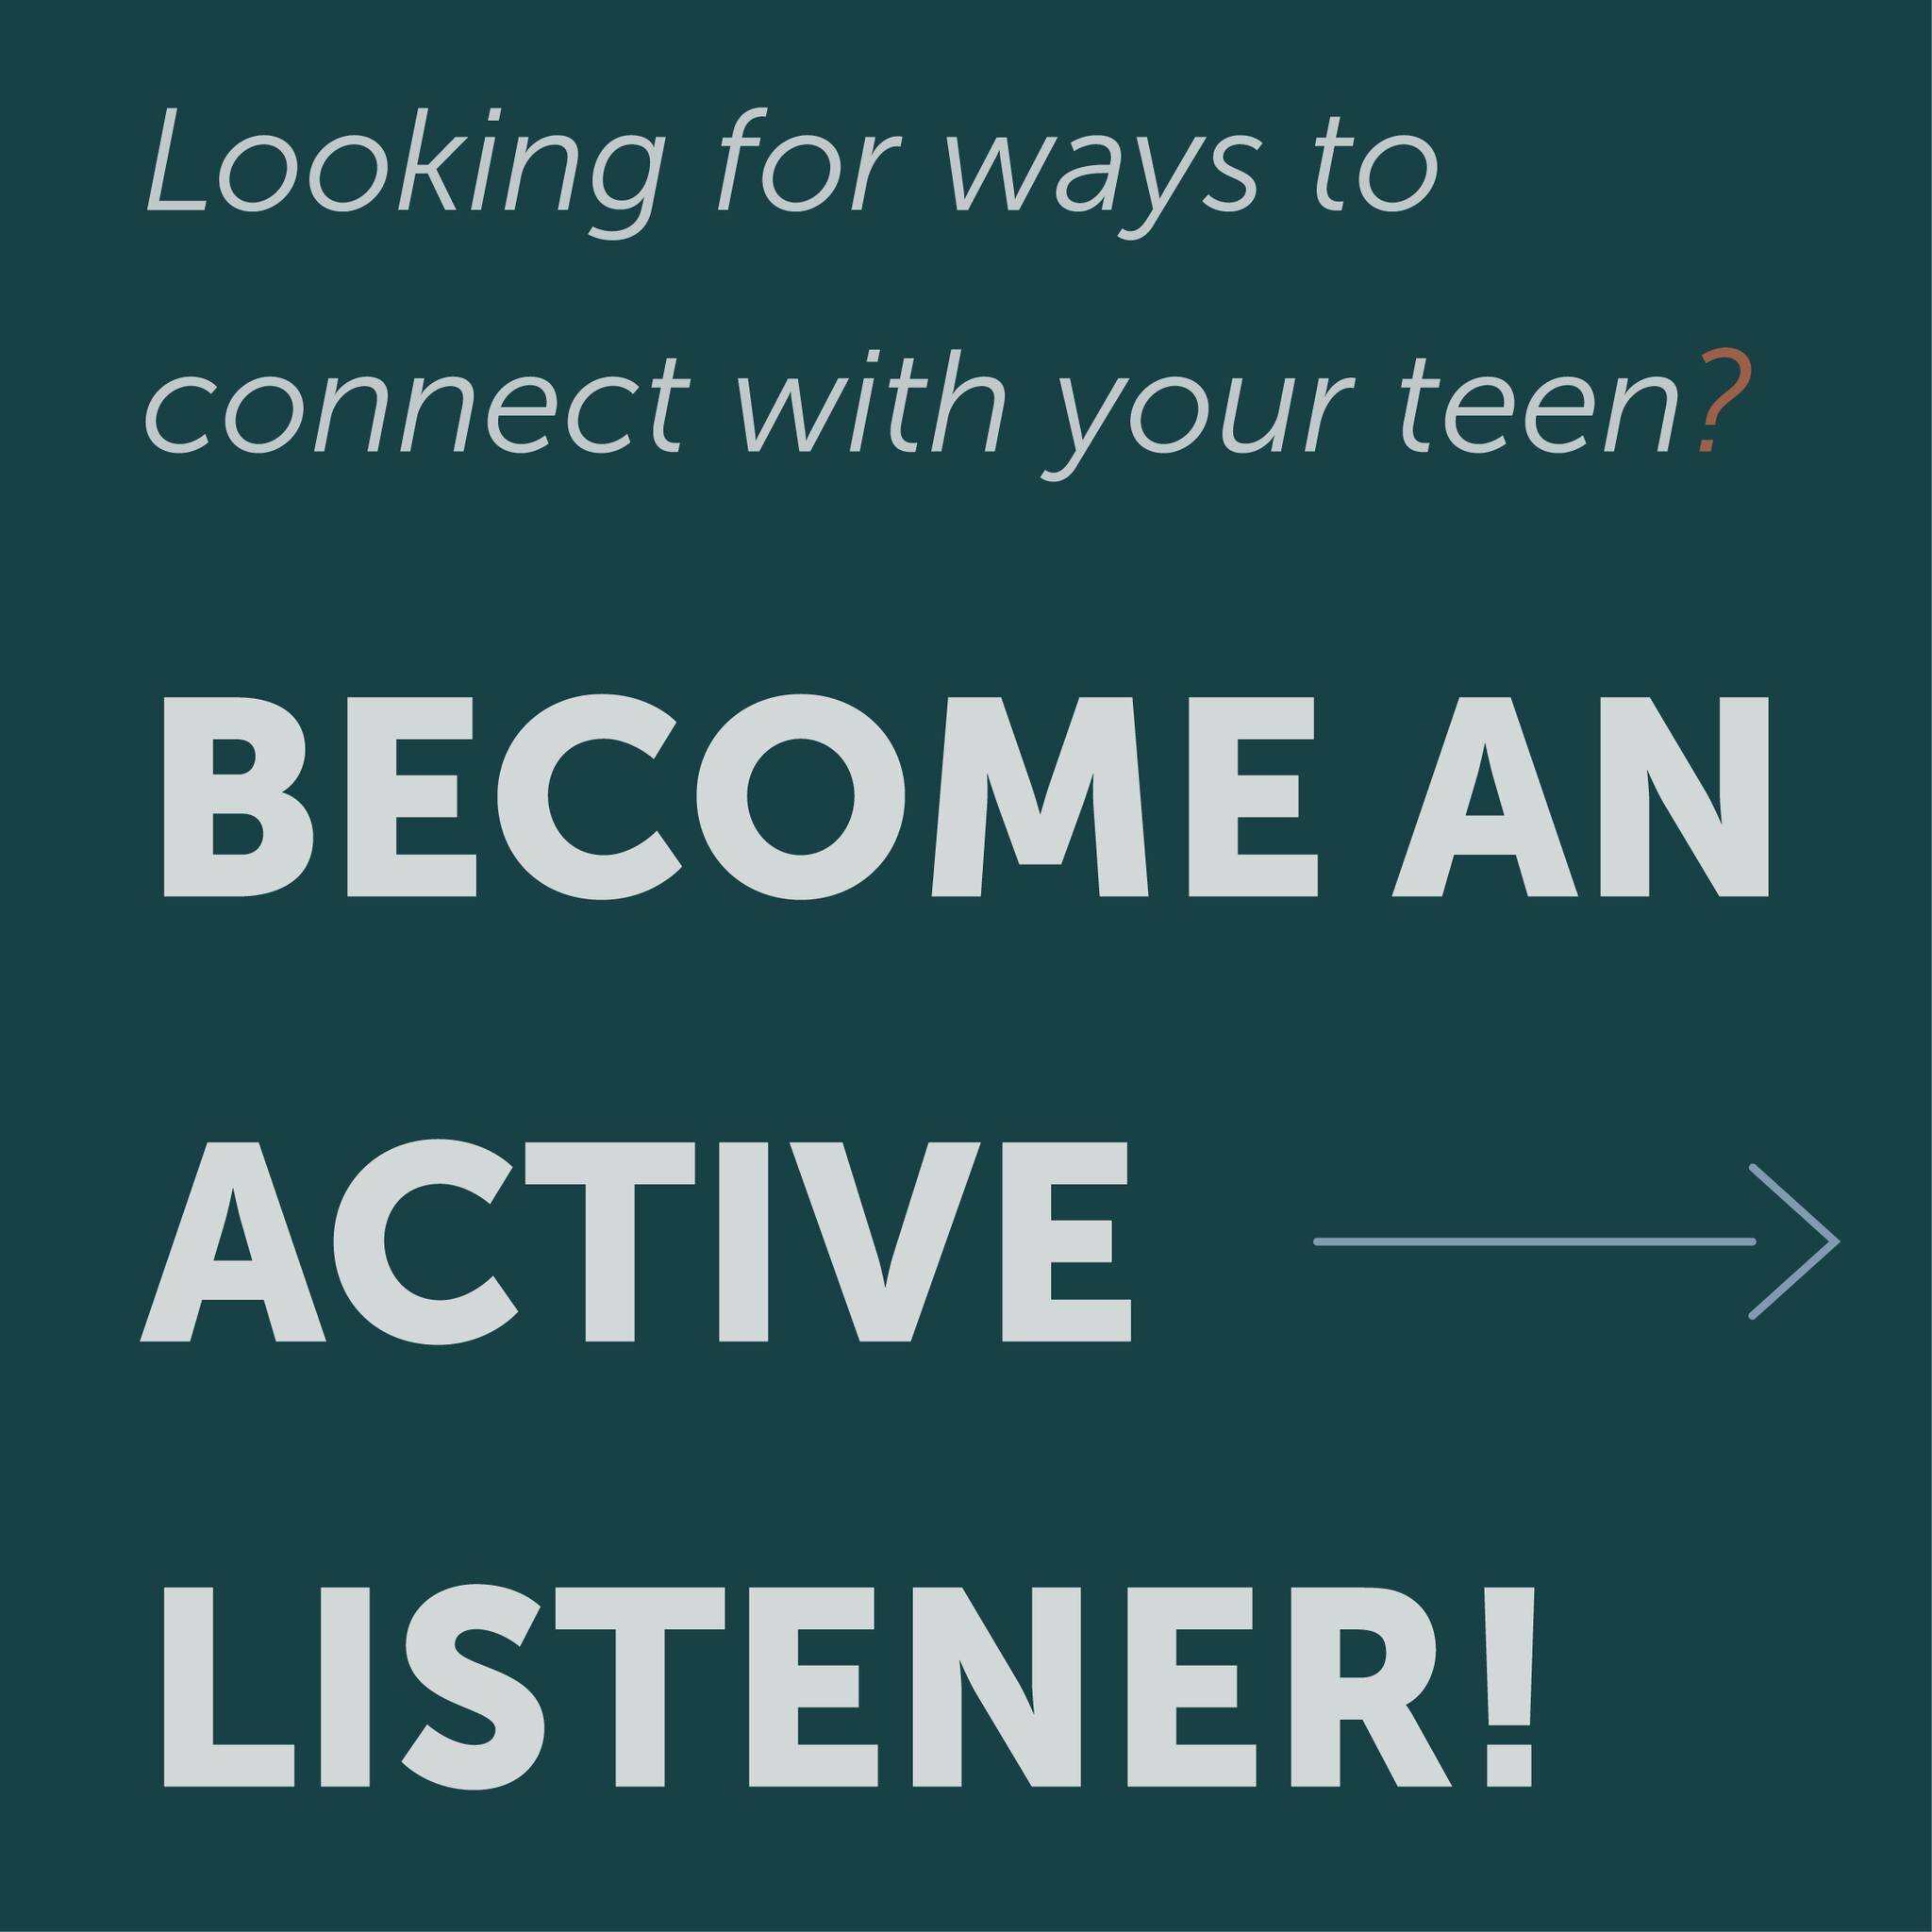 Every parent wants to be able to communicate with their teen(s). Here's a clinically-proven method to do just that!

#ParentingTips #parenting #parenting101 #parentingteens #communication #teens